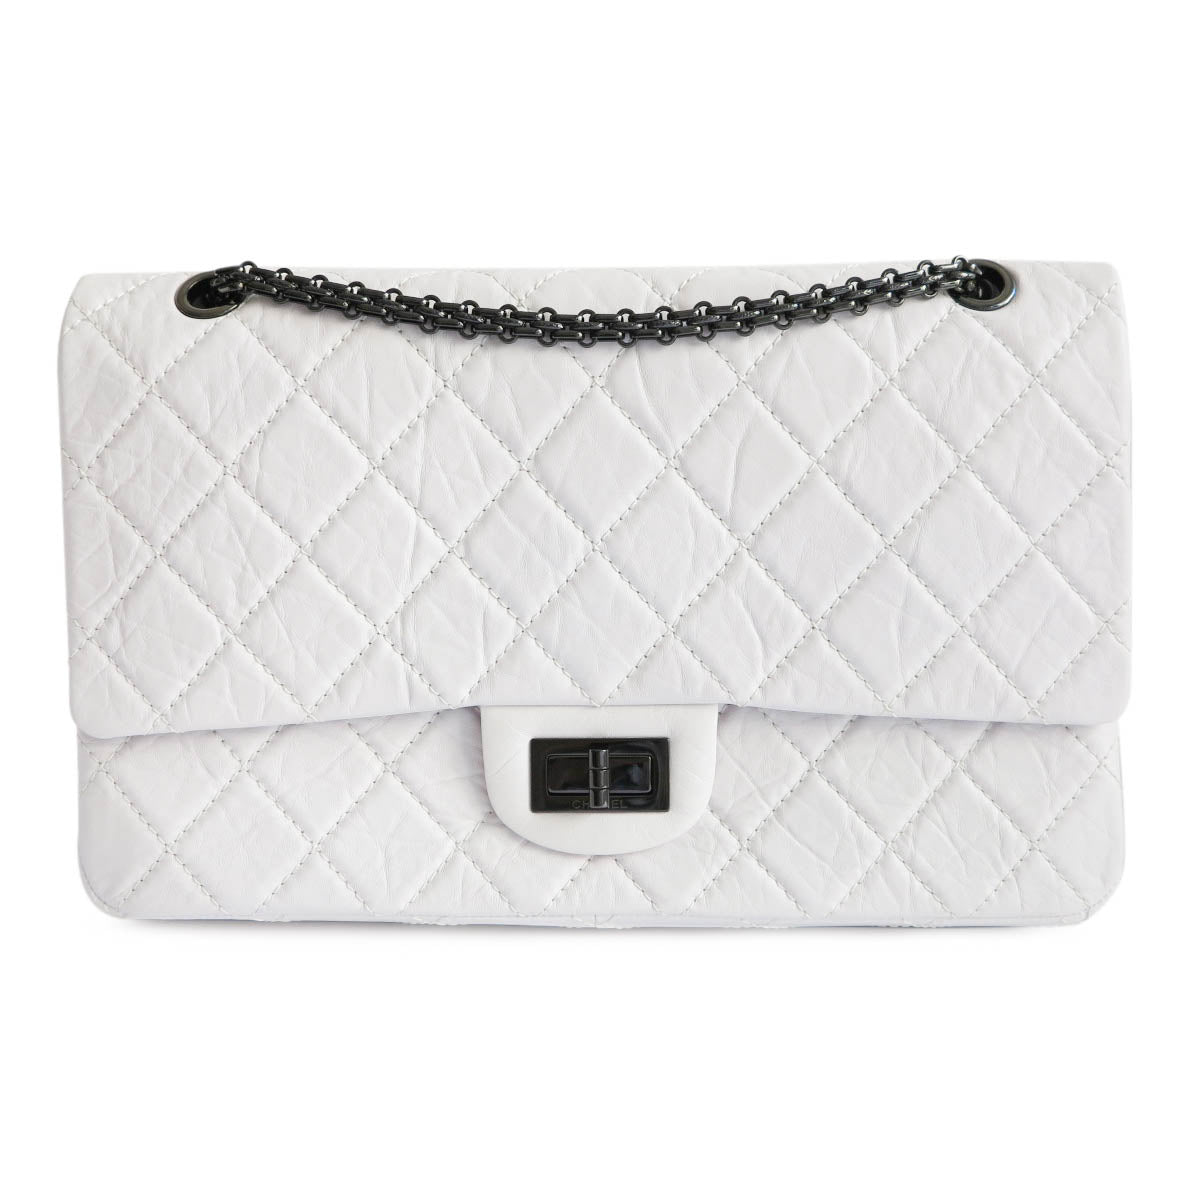 CHANEL 2.55 Reissue Flap Bag Size 227 in White Aged Calfskin